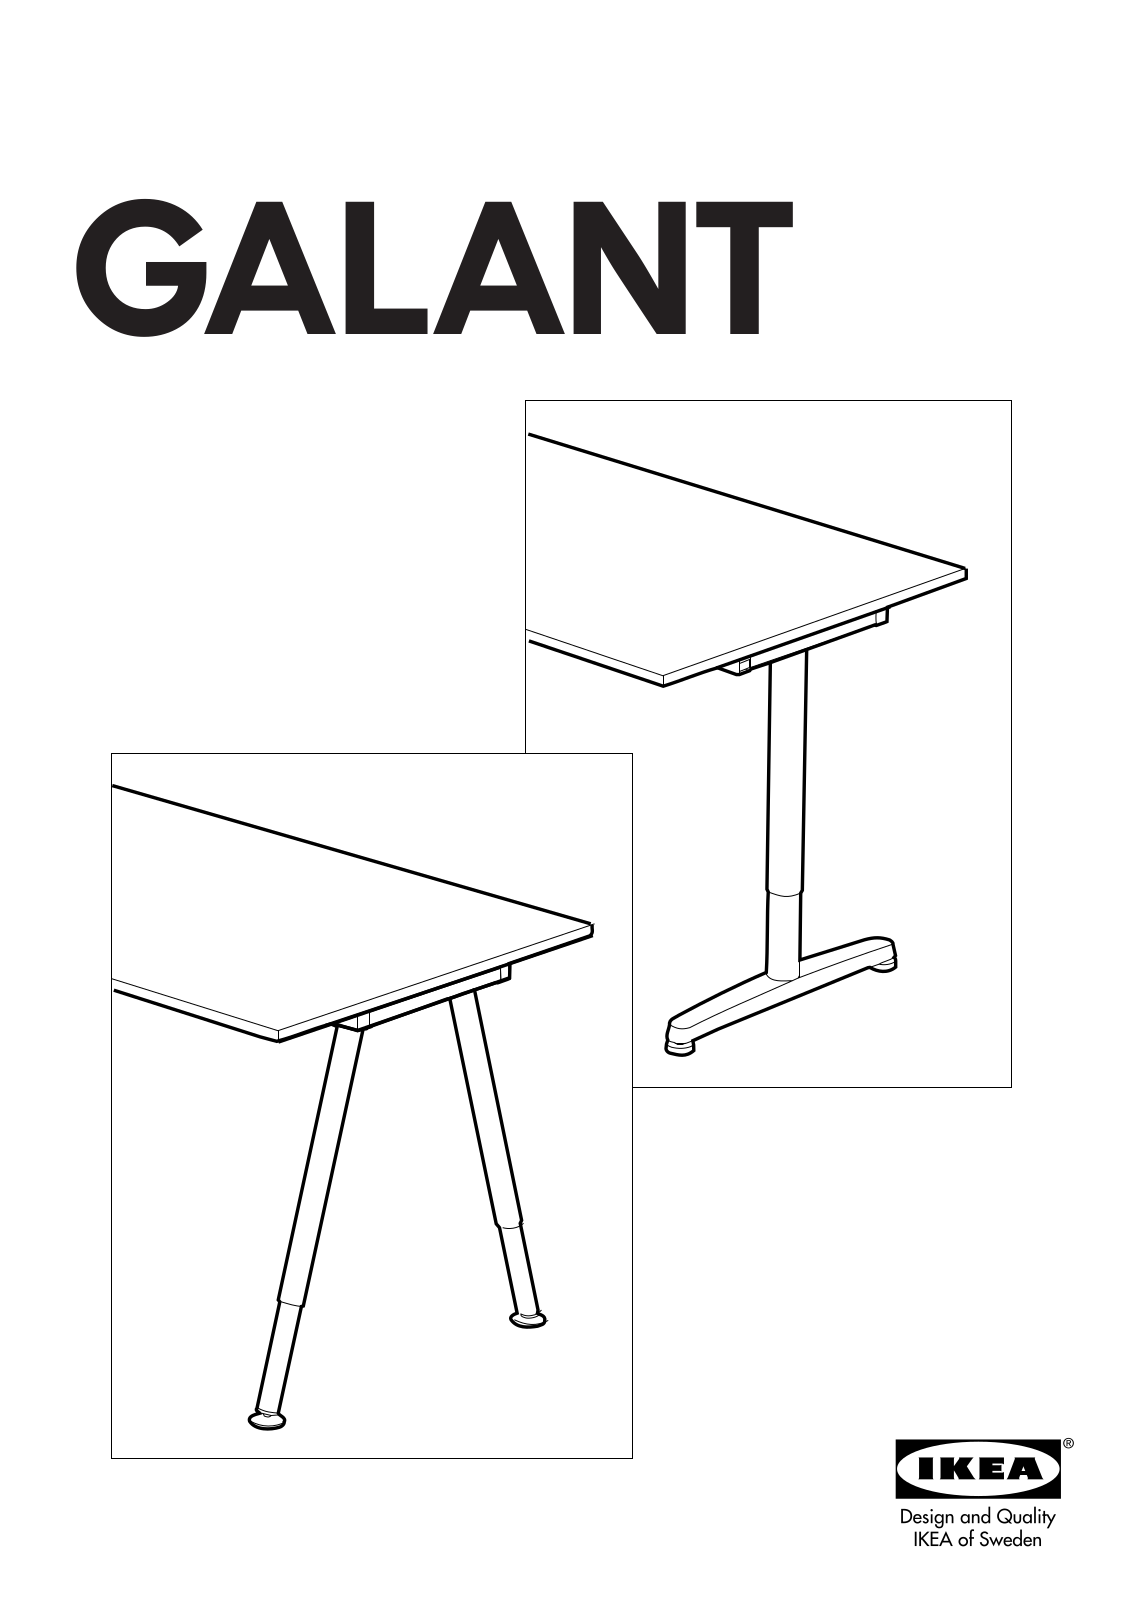 IKEA GALANT FRAME FOR CORNER TABLE TOP, GALANT FRAME EXTENSION 22 7-8X15 3-8, GALANT FRAME FOR 1-2 ROUND TABLE TOP, GALANT FRAME 63 Assembly Instruction